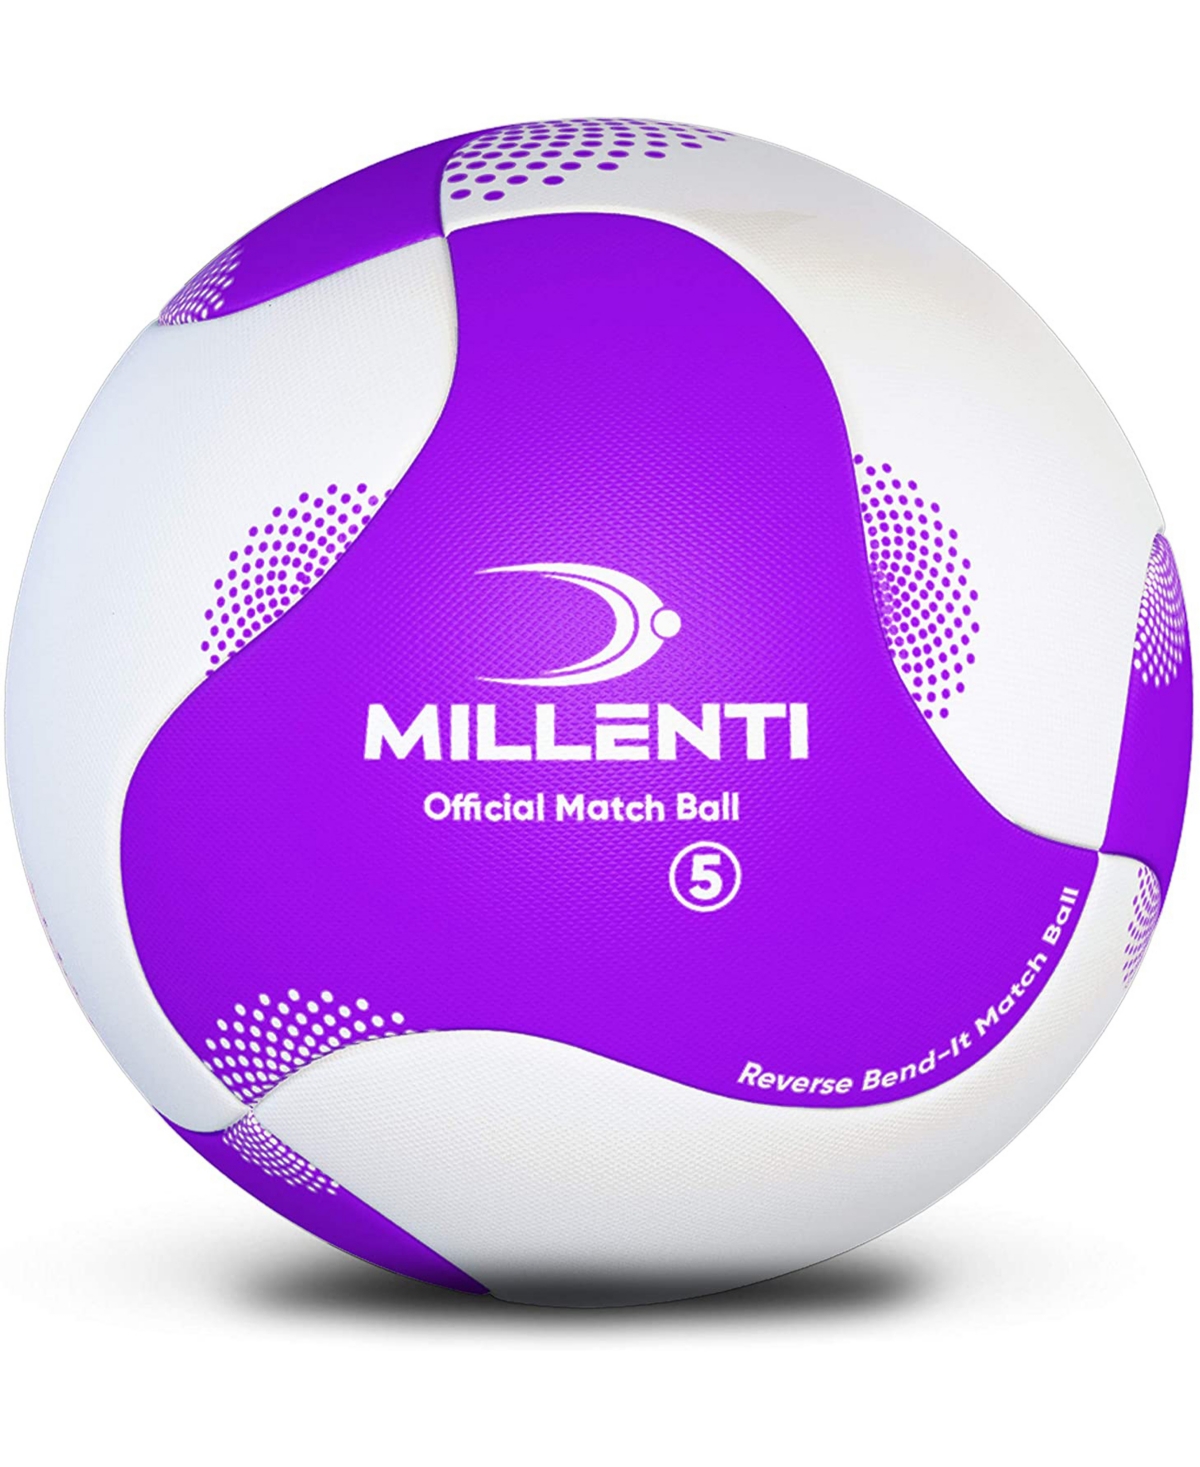 Millenti Us Soccer Ball Official Size 5 - Reverse Bend-it Soccer Ball With High-visibility, Easy-to-track Des In Purple/white